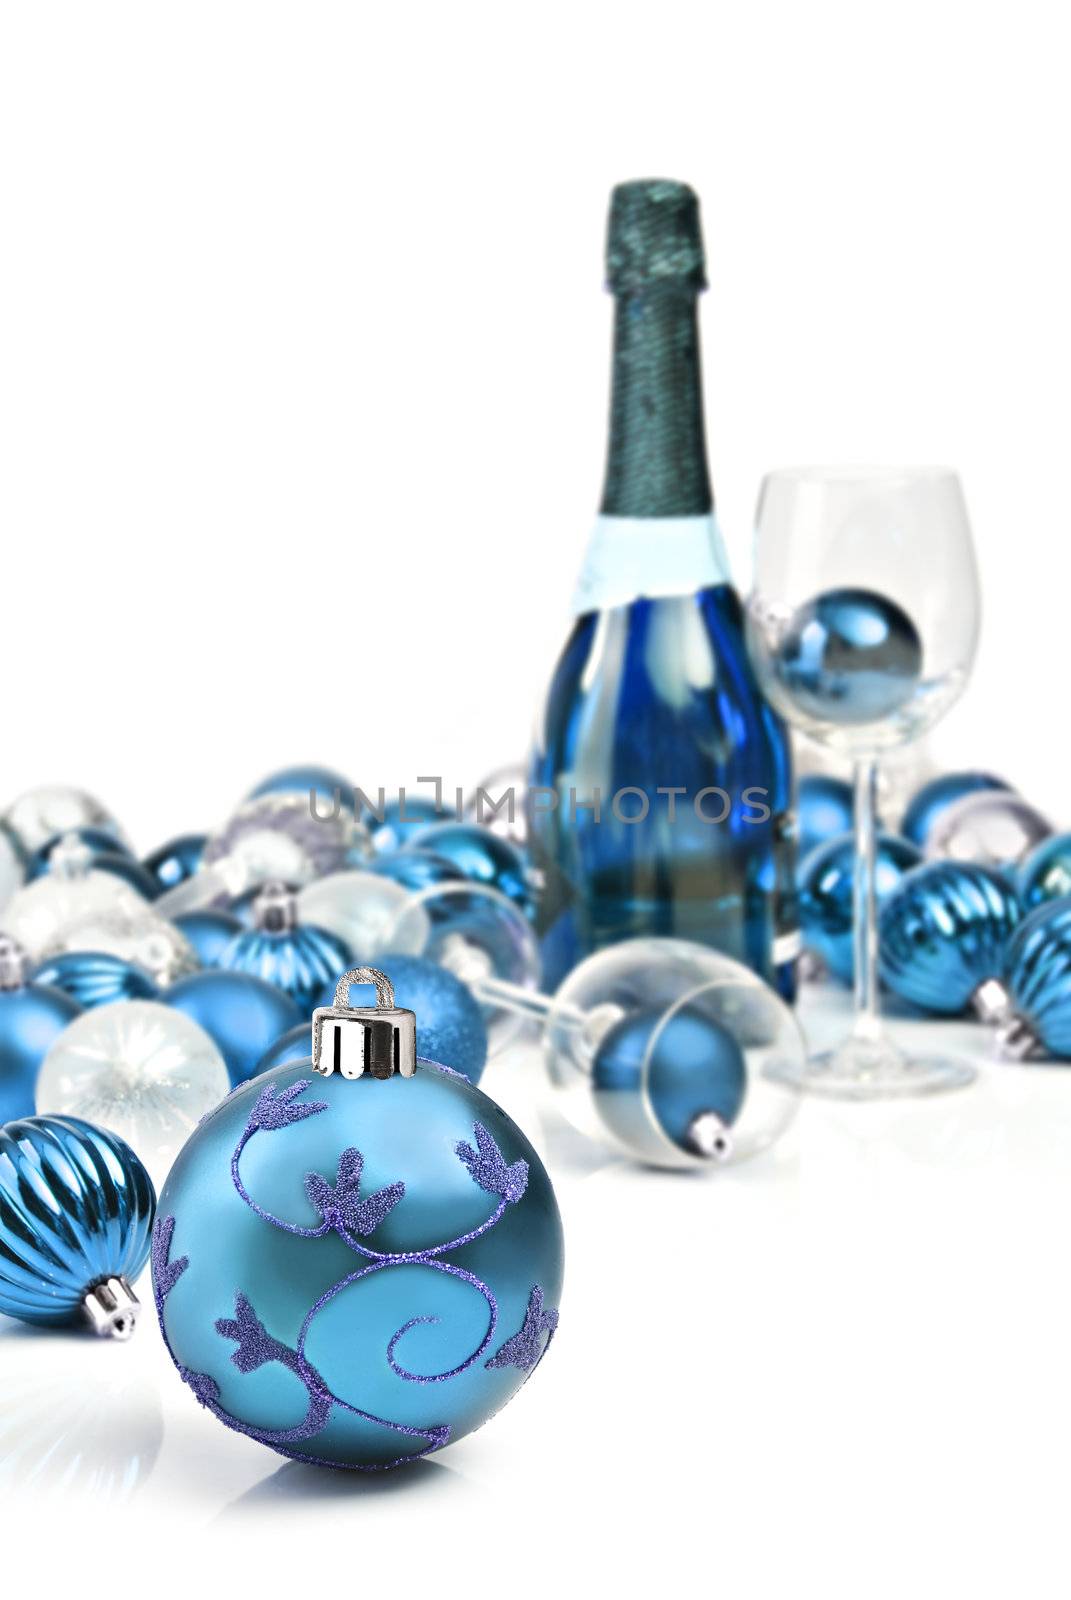 Blue Christmas ornaments with a bottle of sparkling wine by tish1